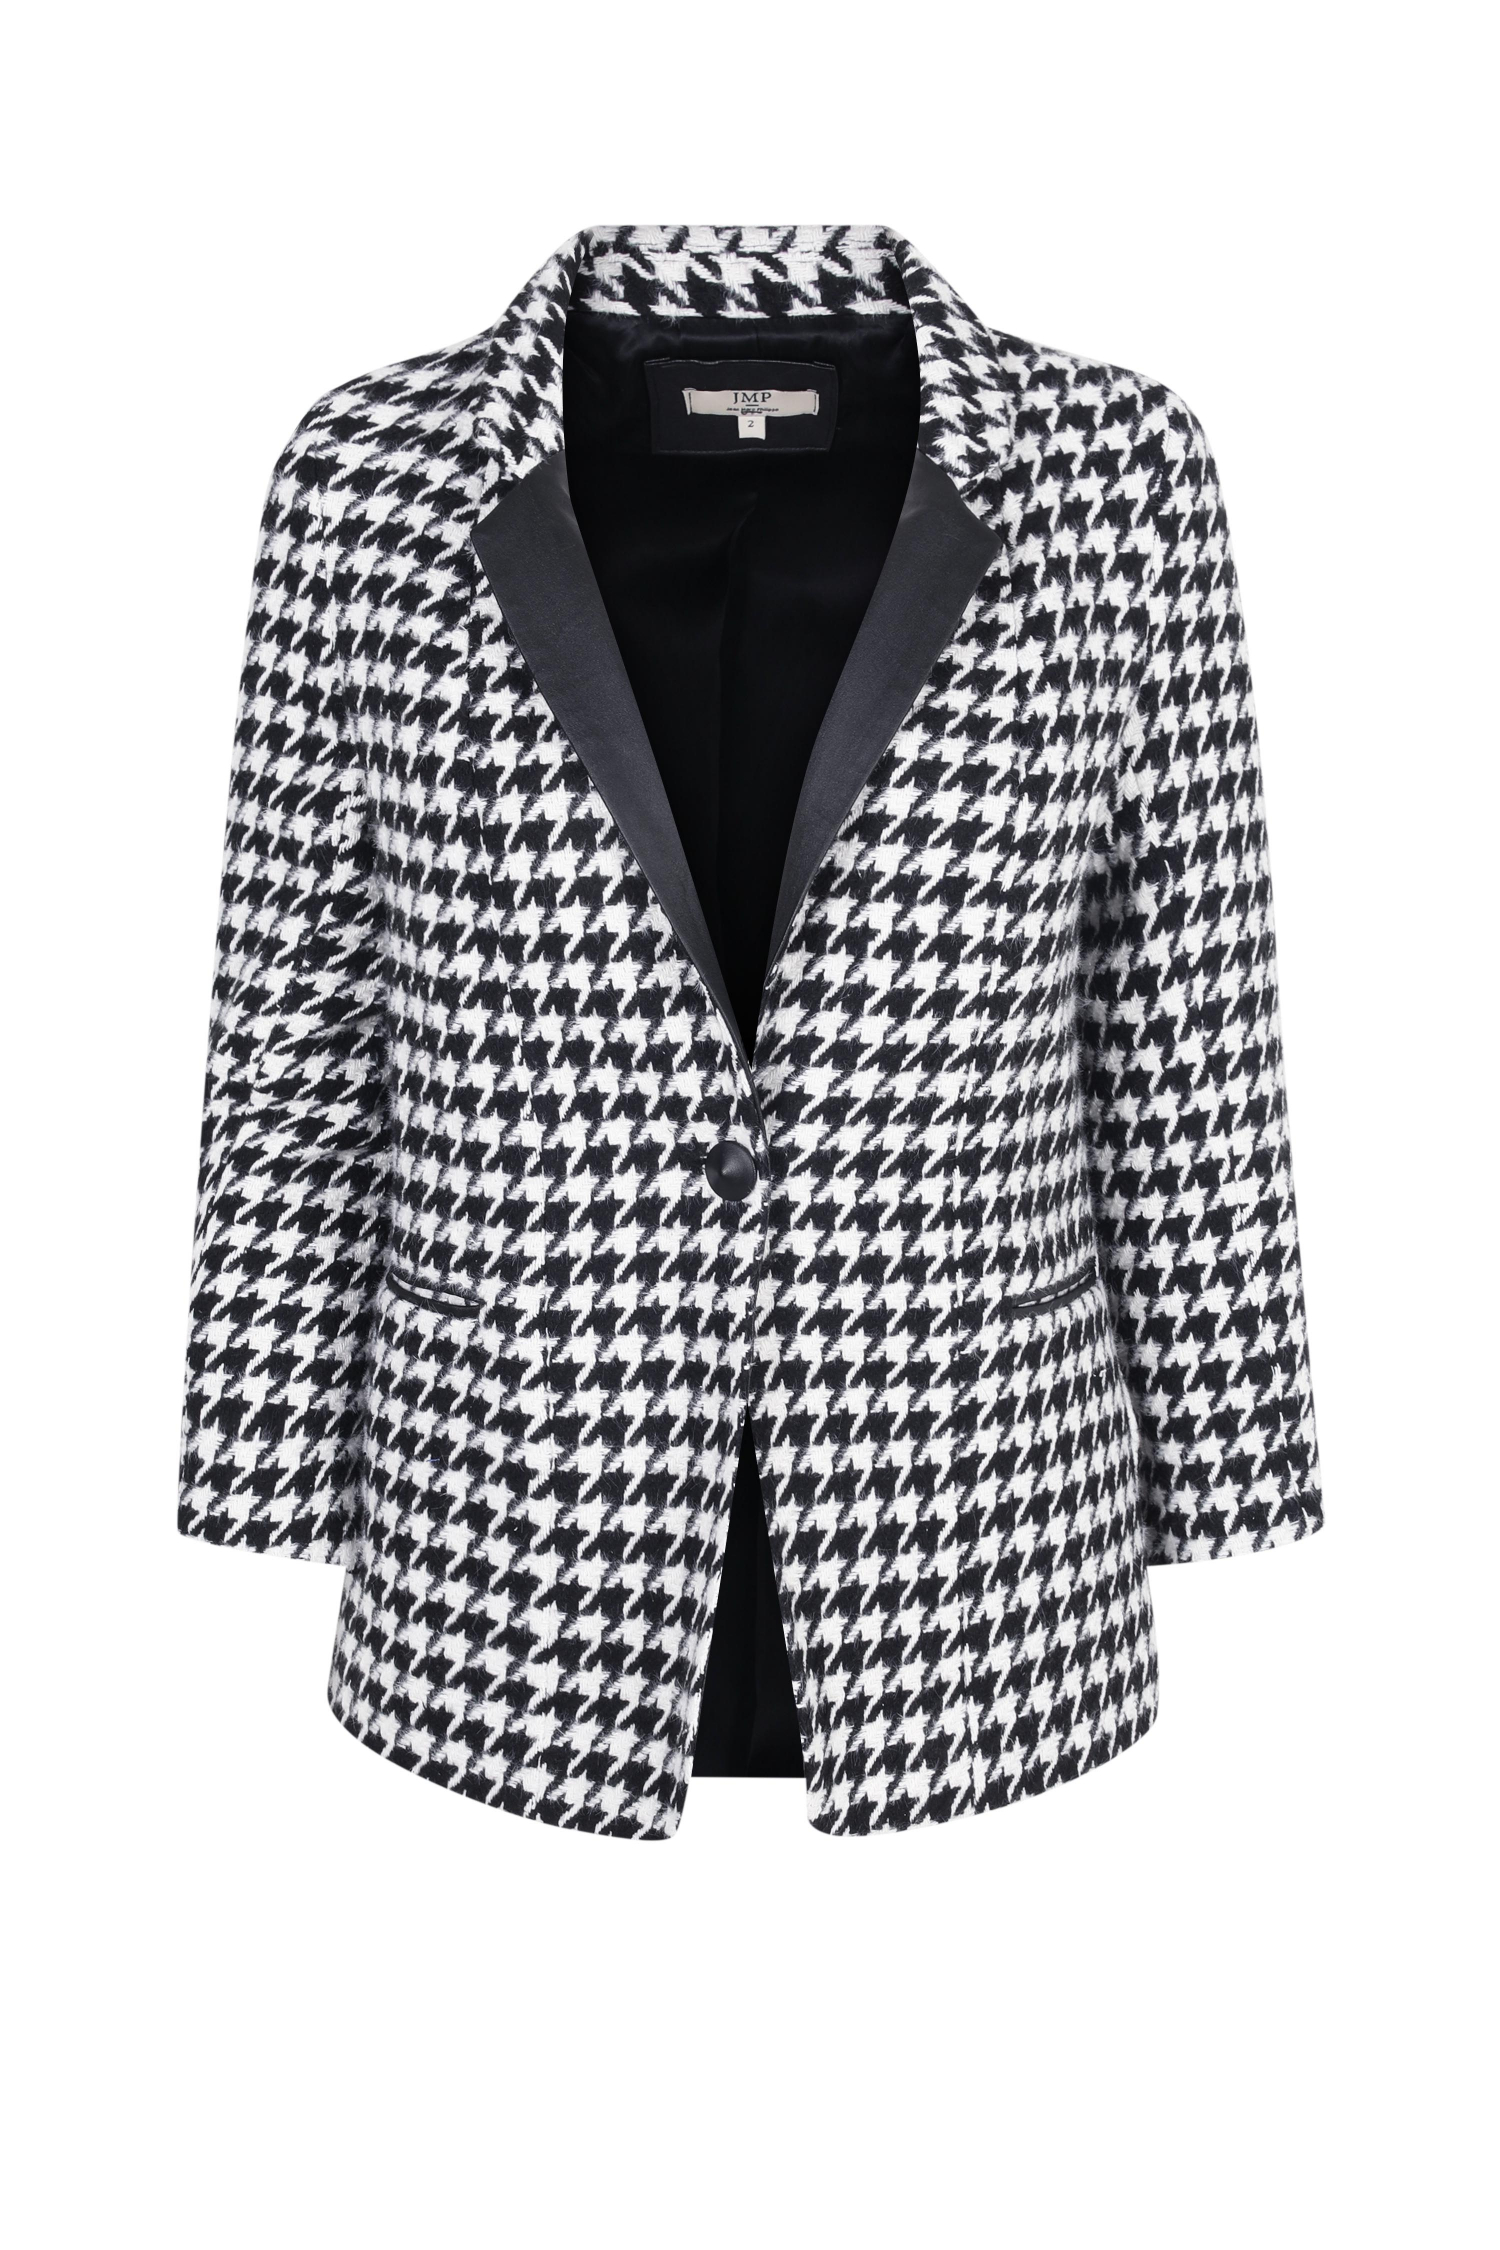 Tailored jacket with houndstooth print and vegan leather